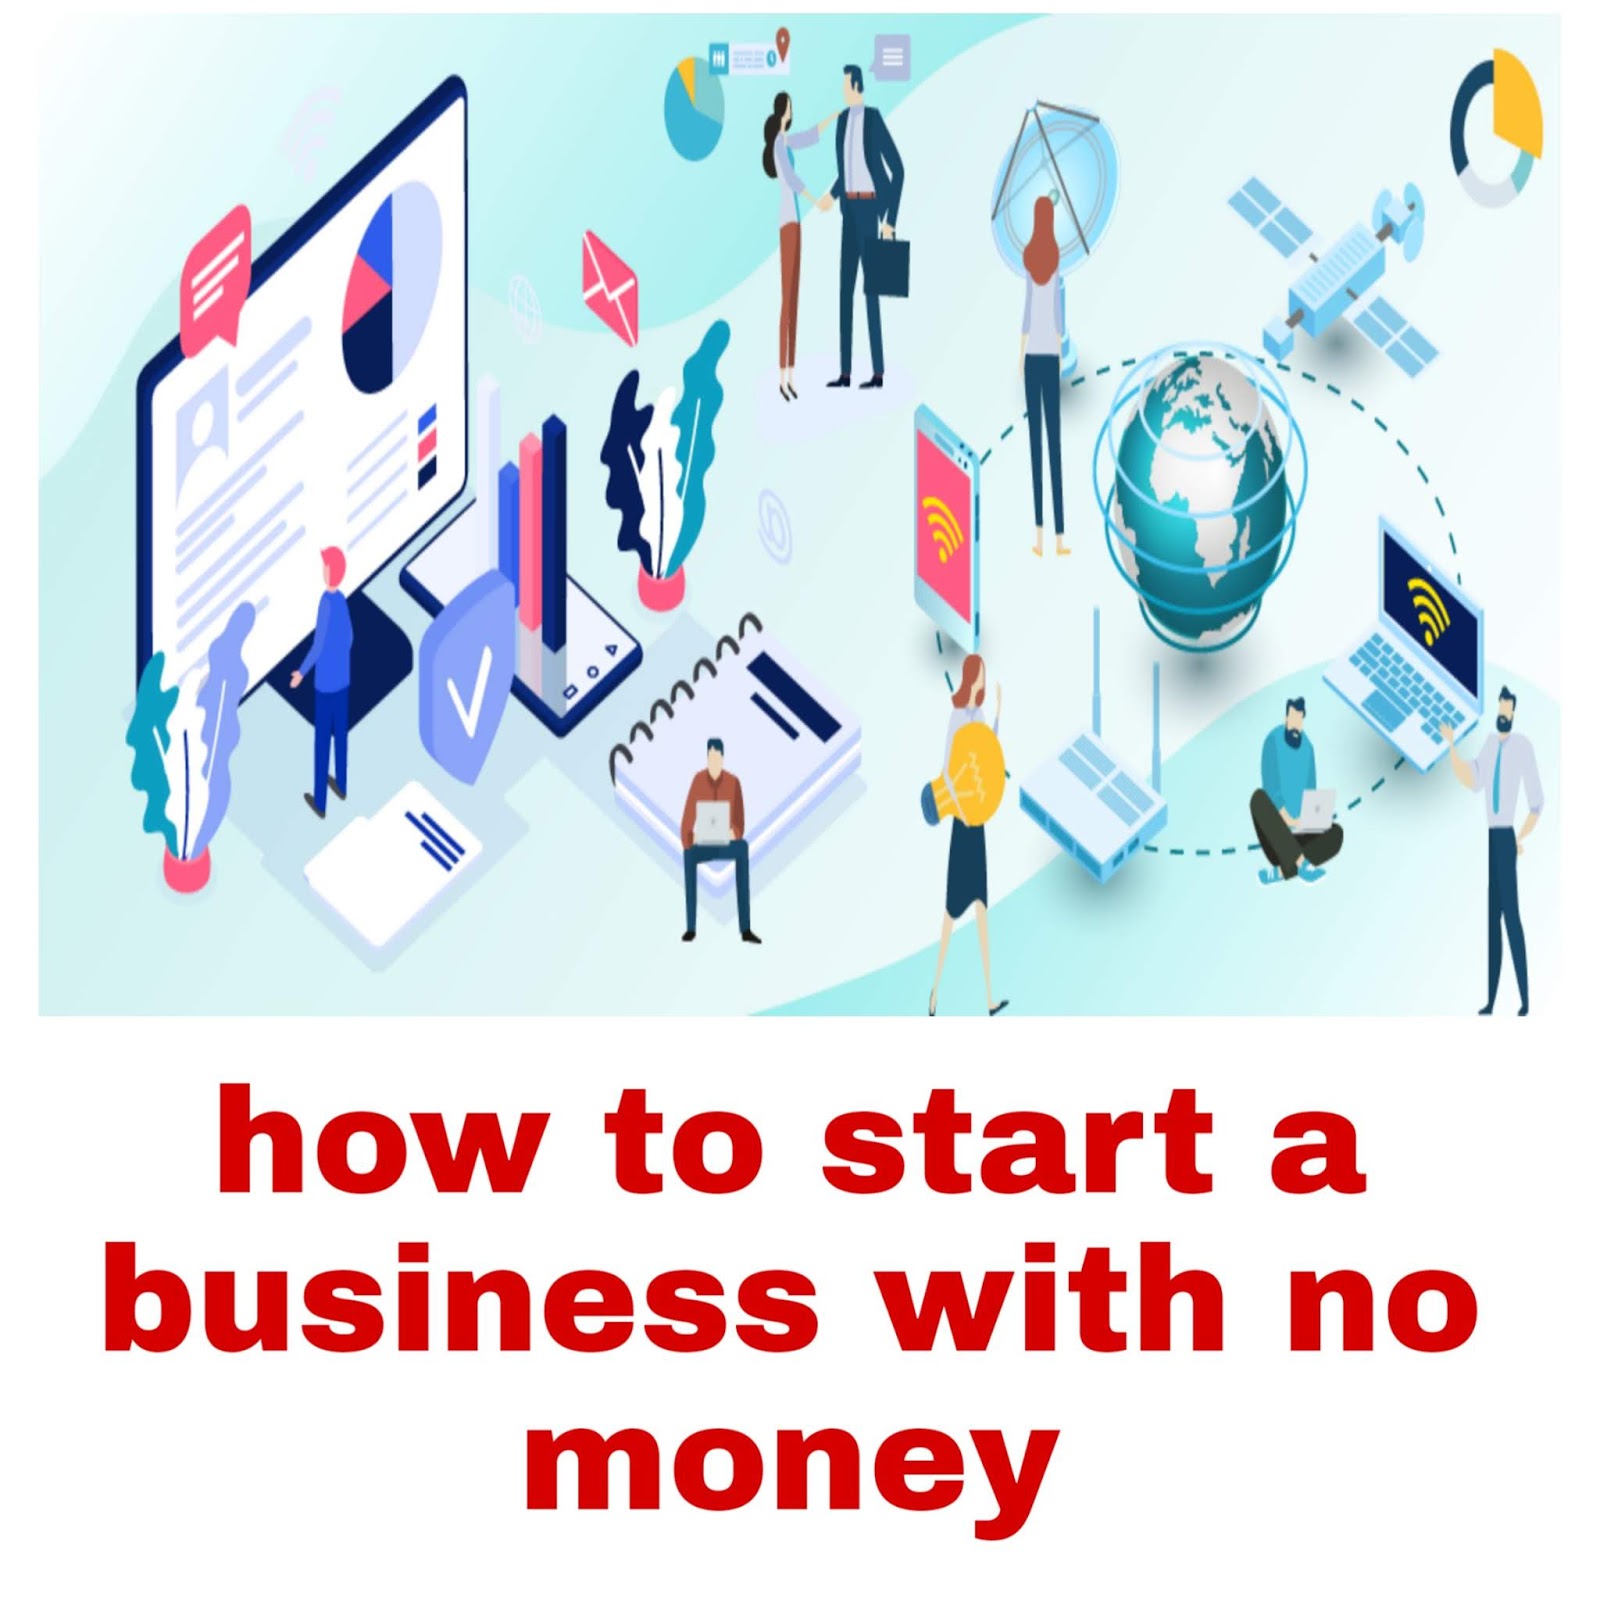 How to start a business with no money Startupnews4you